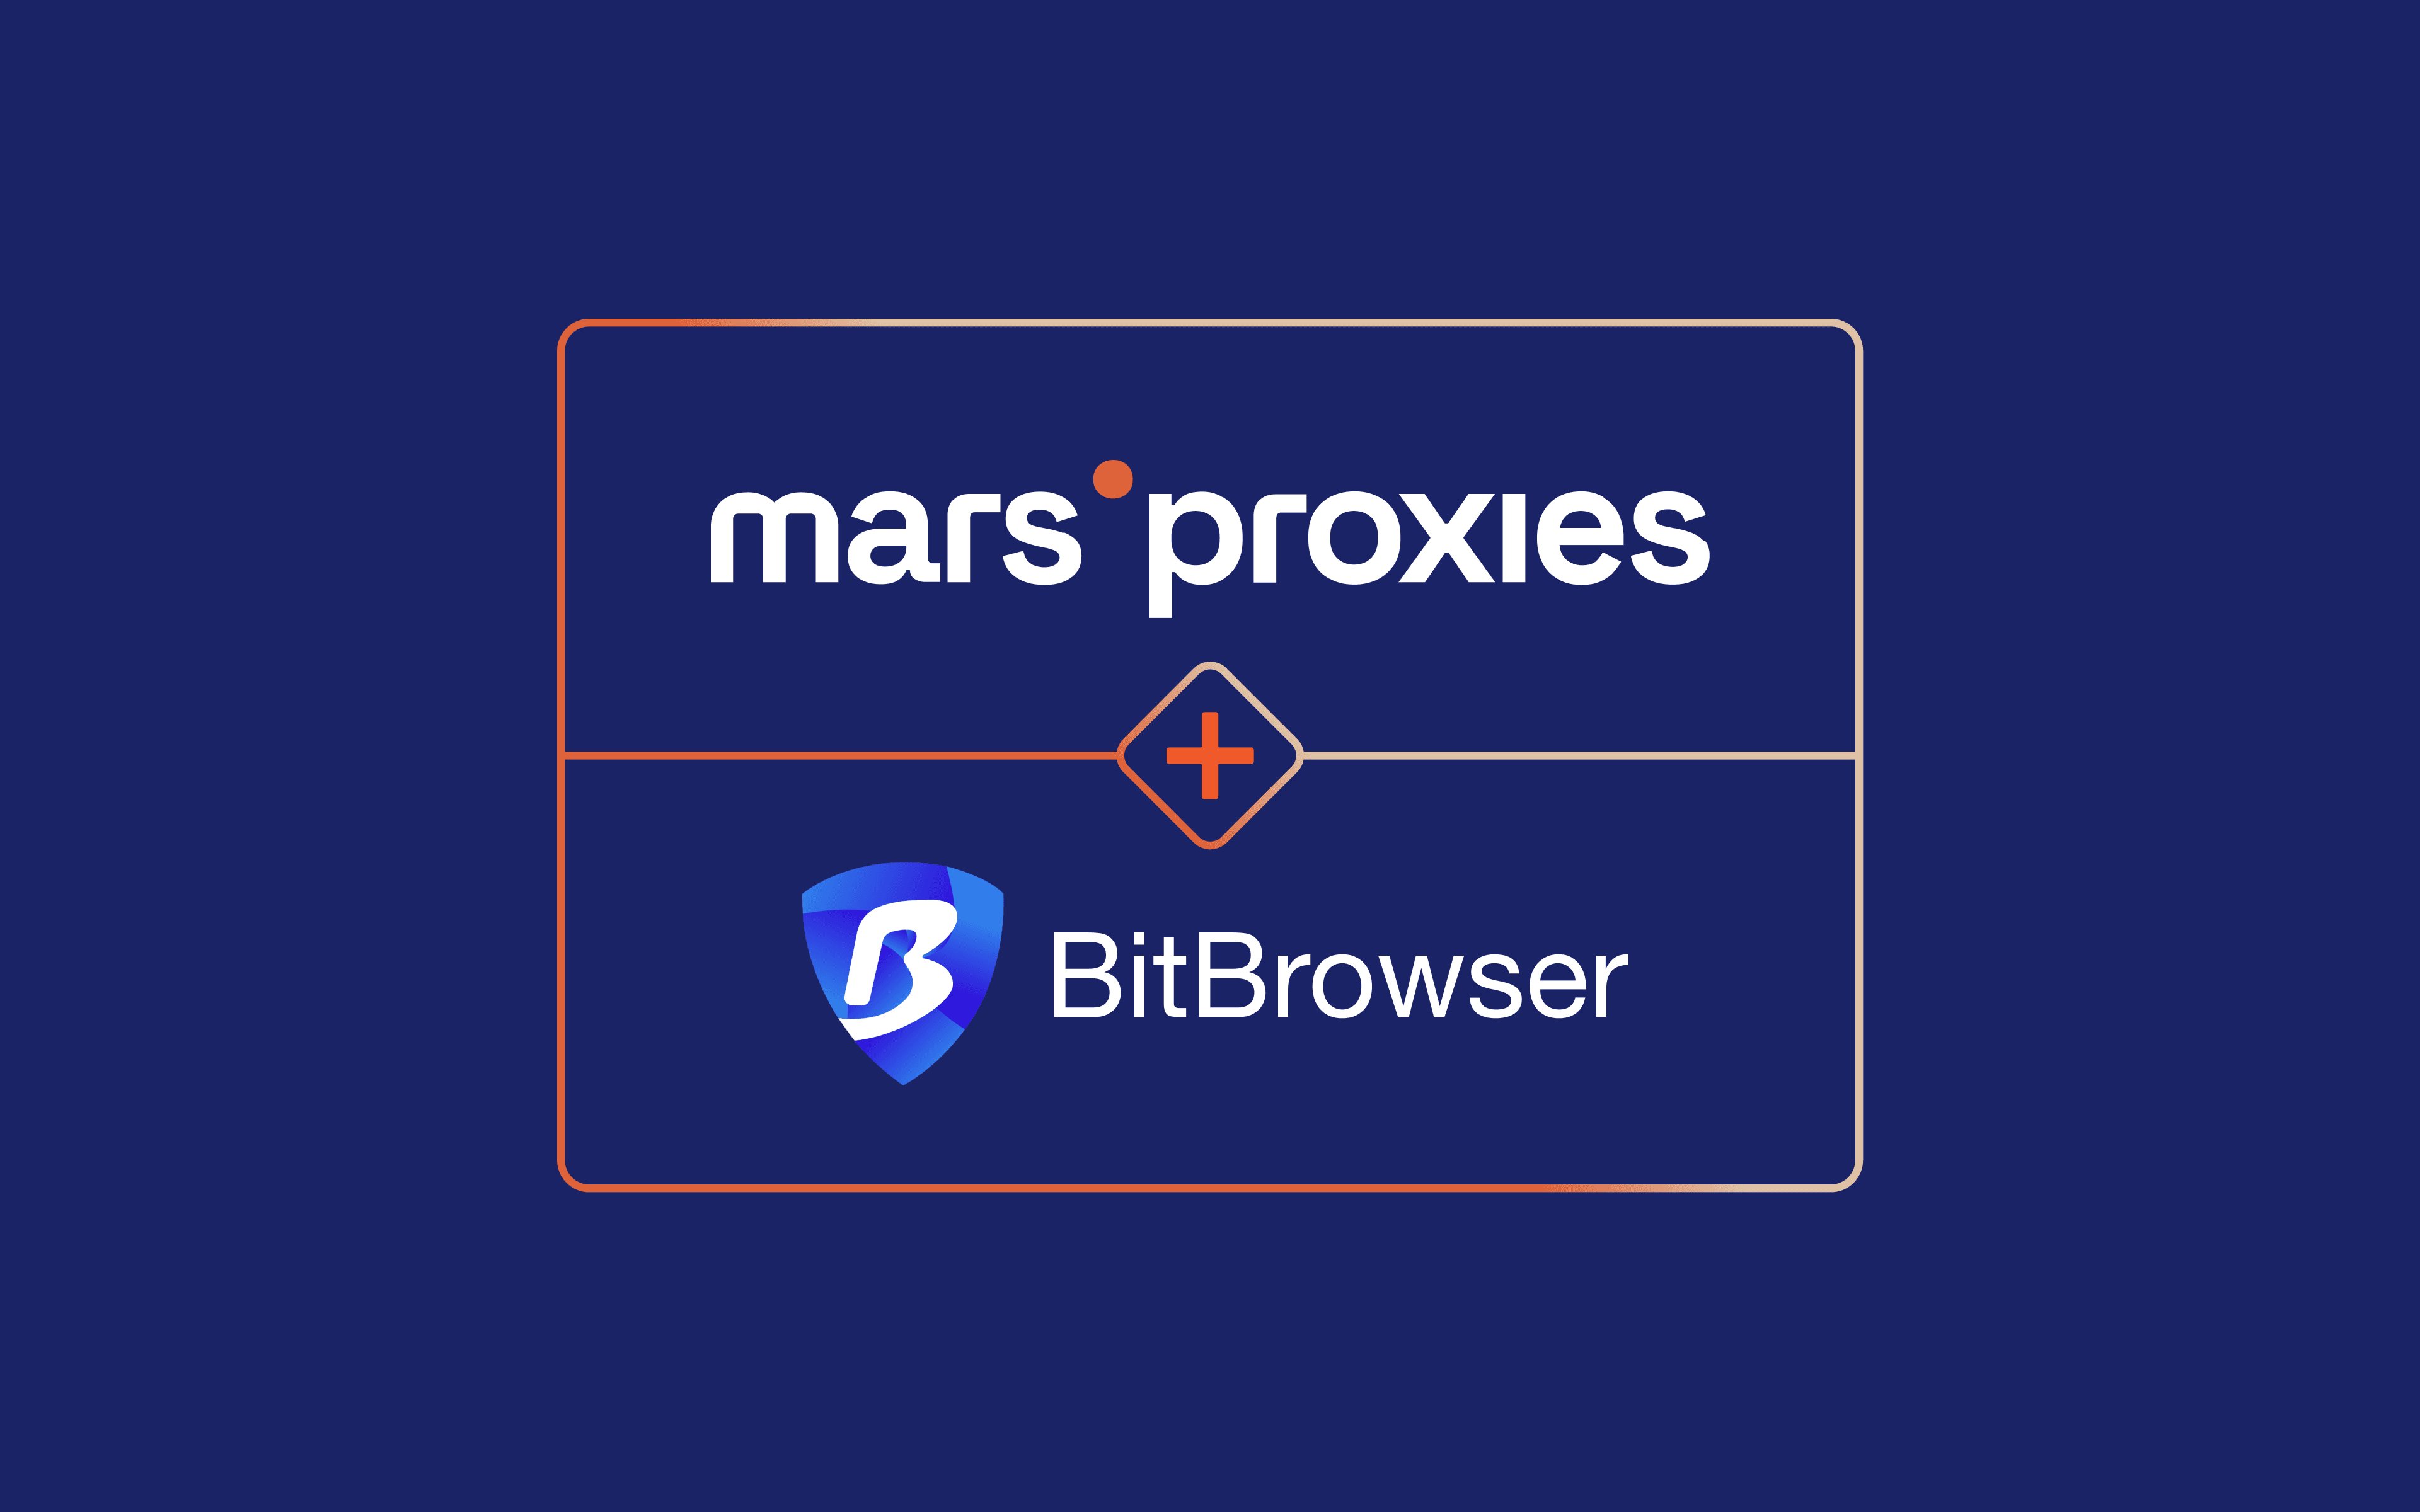 marsproxies and bitbrowser featured